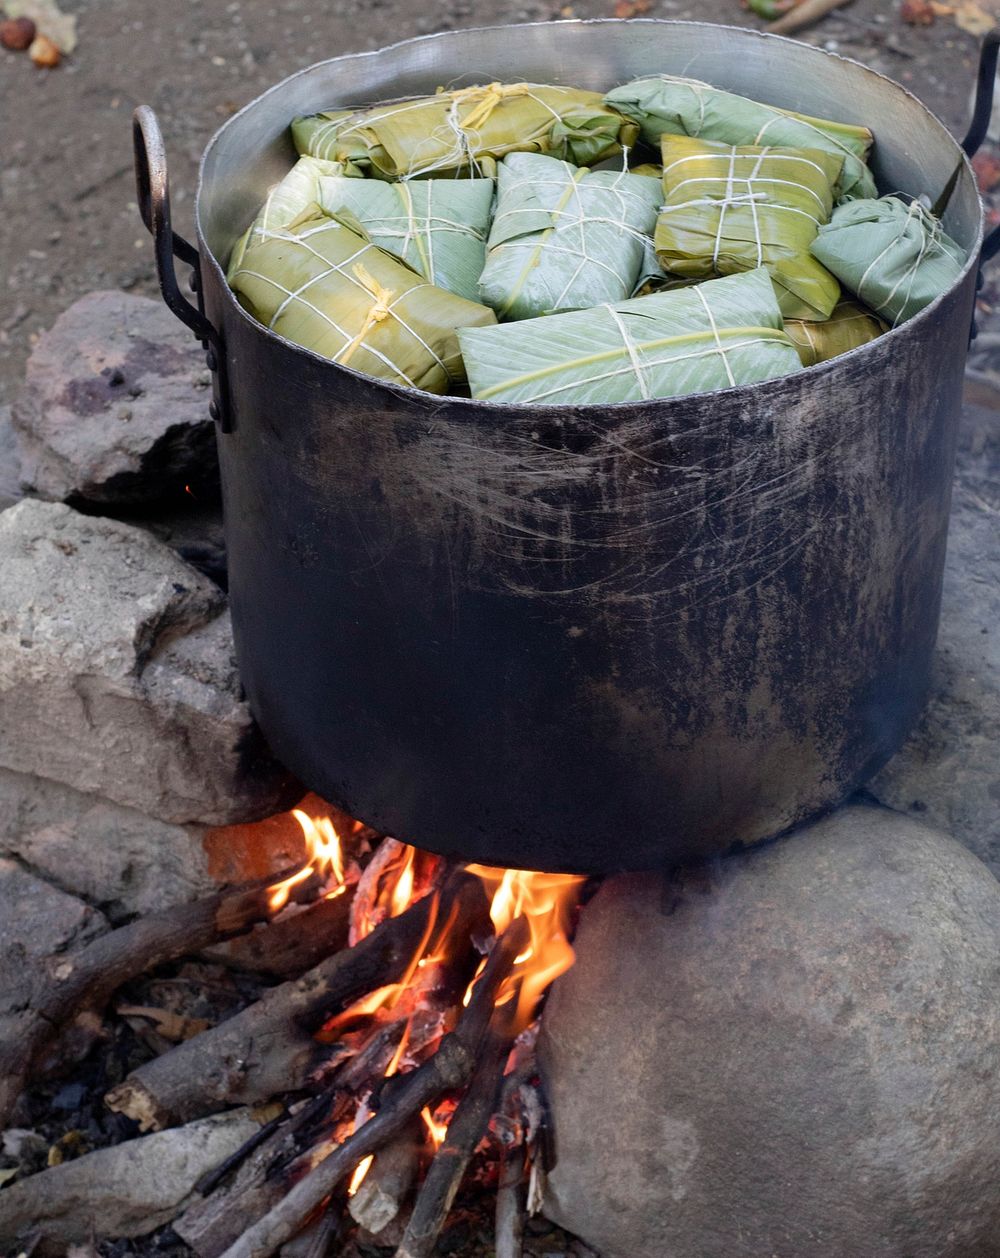 Free banana leaf wrapped food steaming over fire image, public domain CC0 photo.